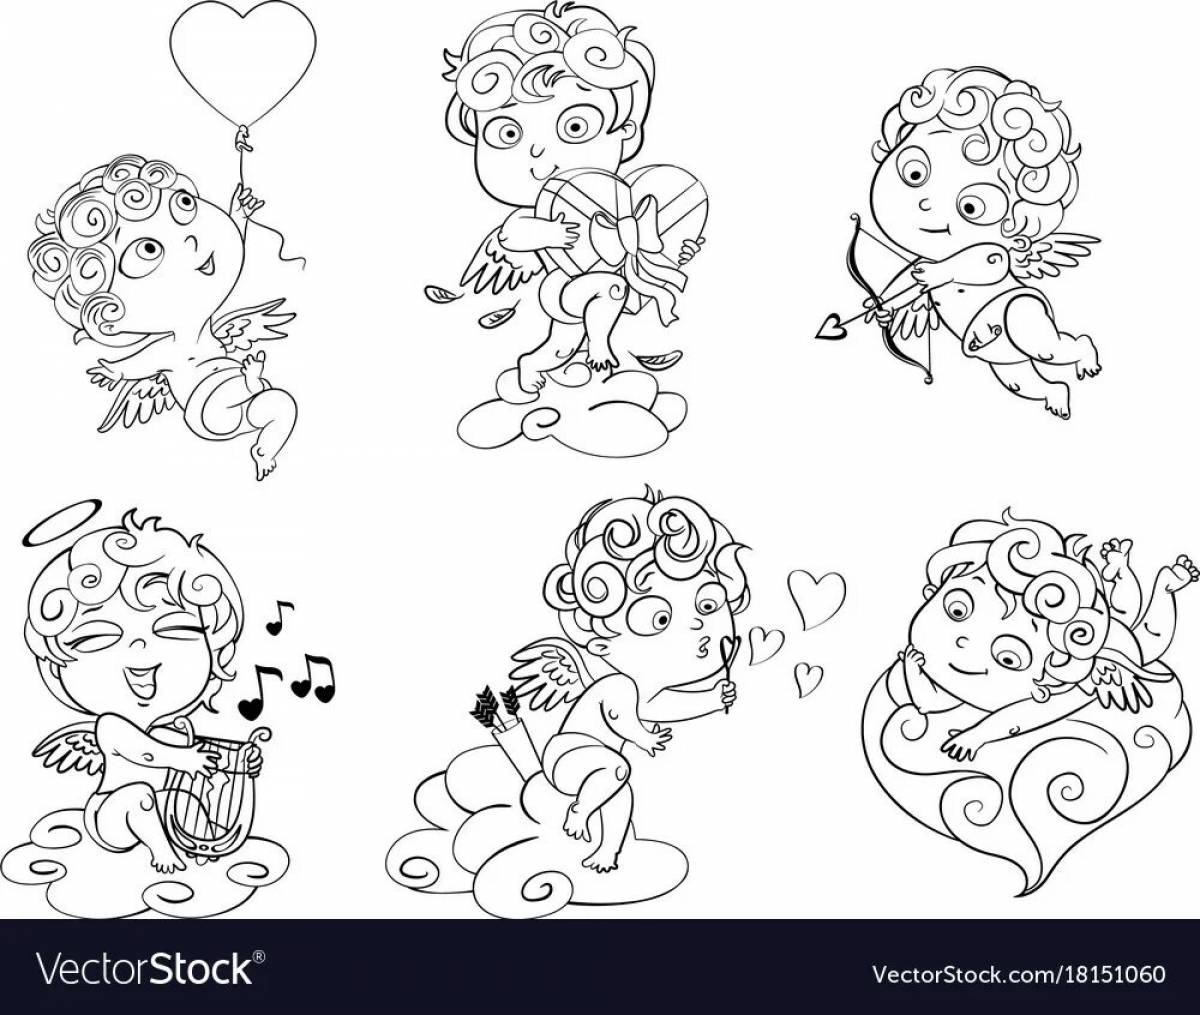 Colouring serene cupid with heart